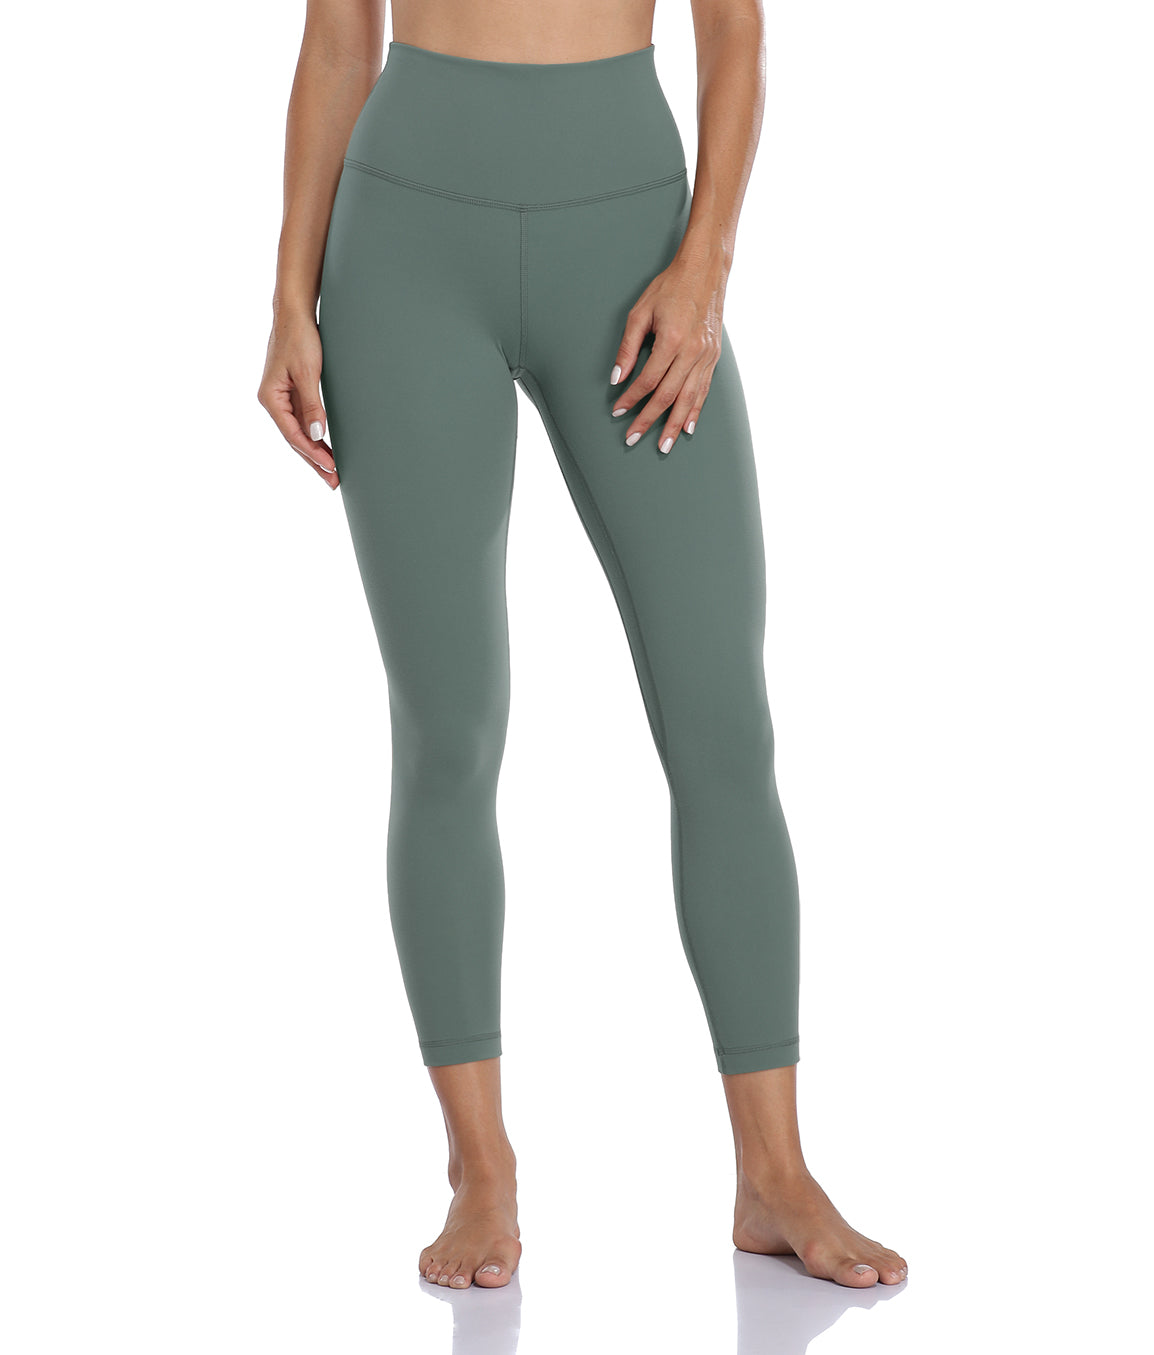 HeyNuts Essential 7/8 Leggings, Buttery Soft Pants Hawthorn Athletic Yoga  Pants 25'', Dazzling Blue, M : Buy Online at Best Price in KSA - Souq is  now : Fashion